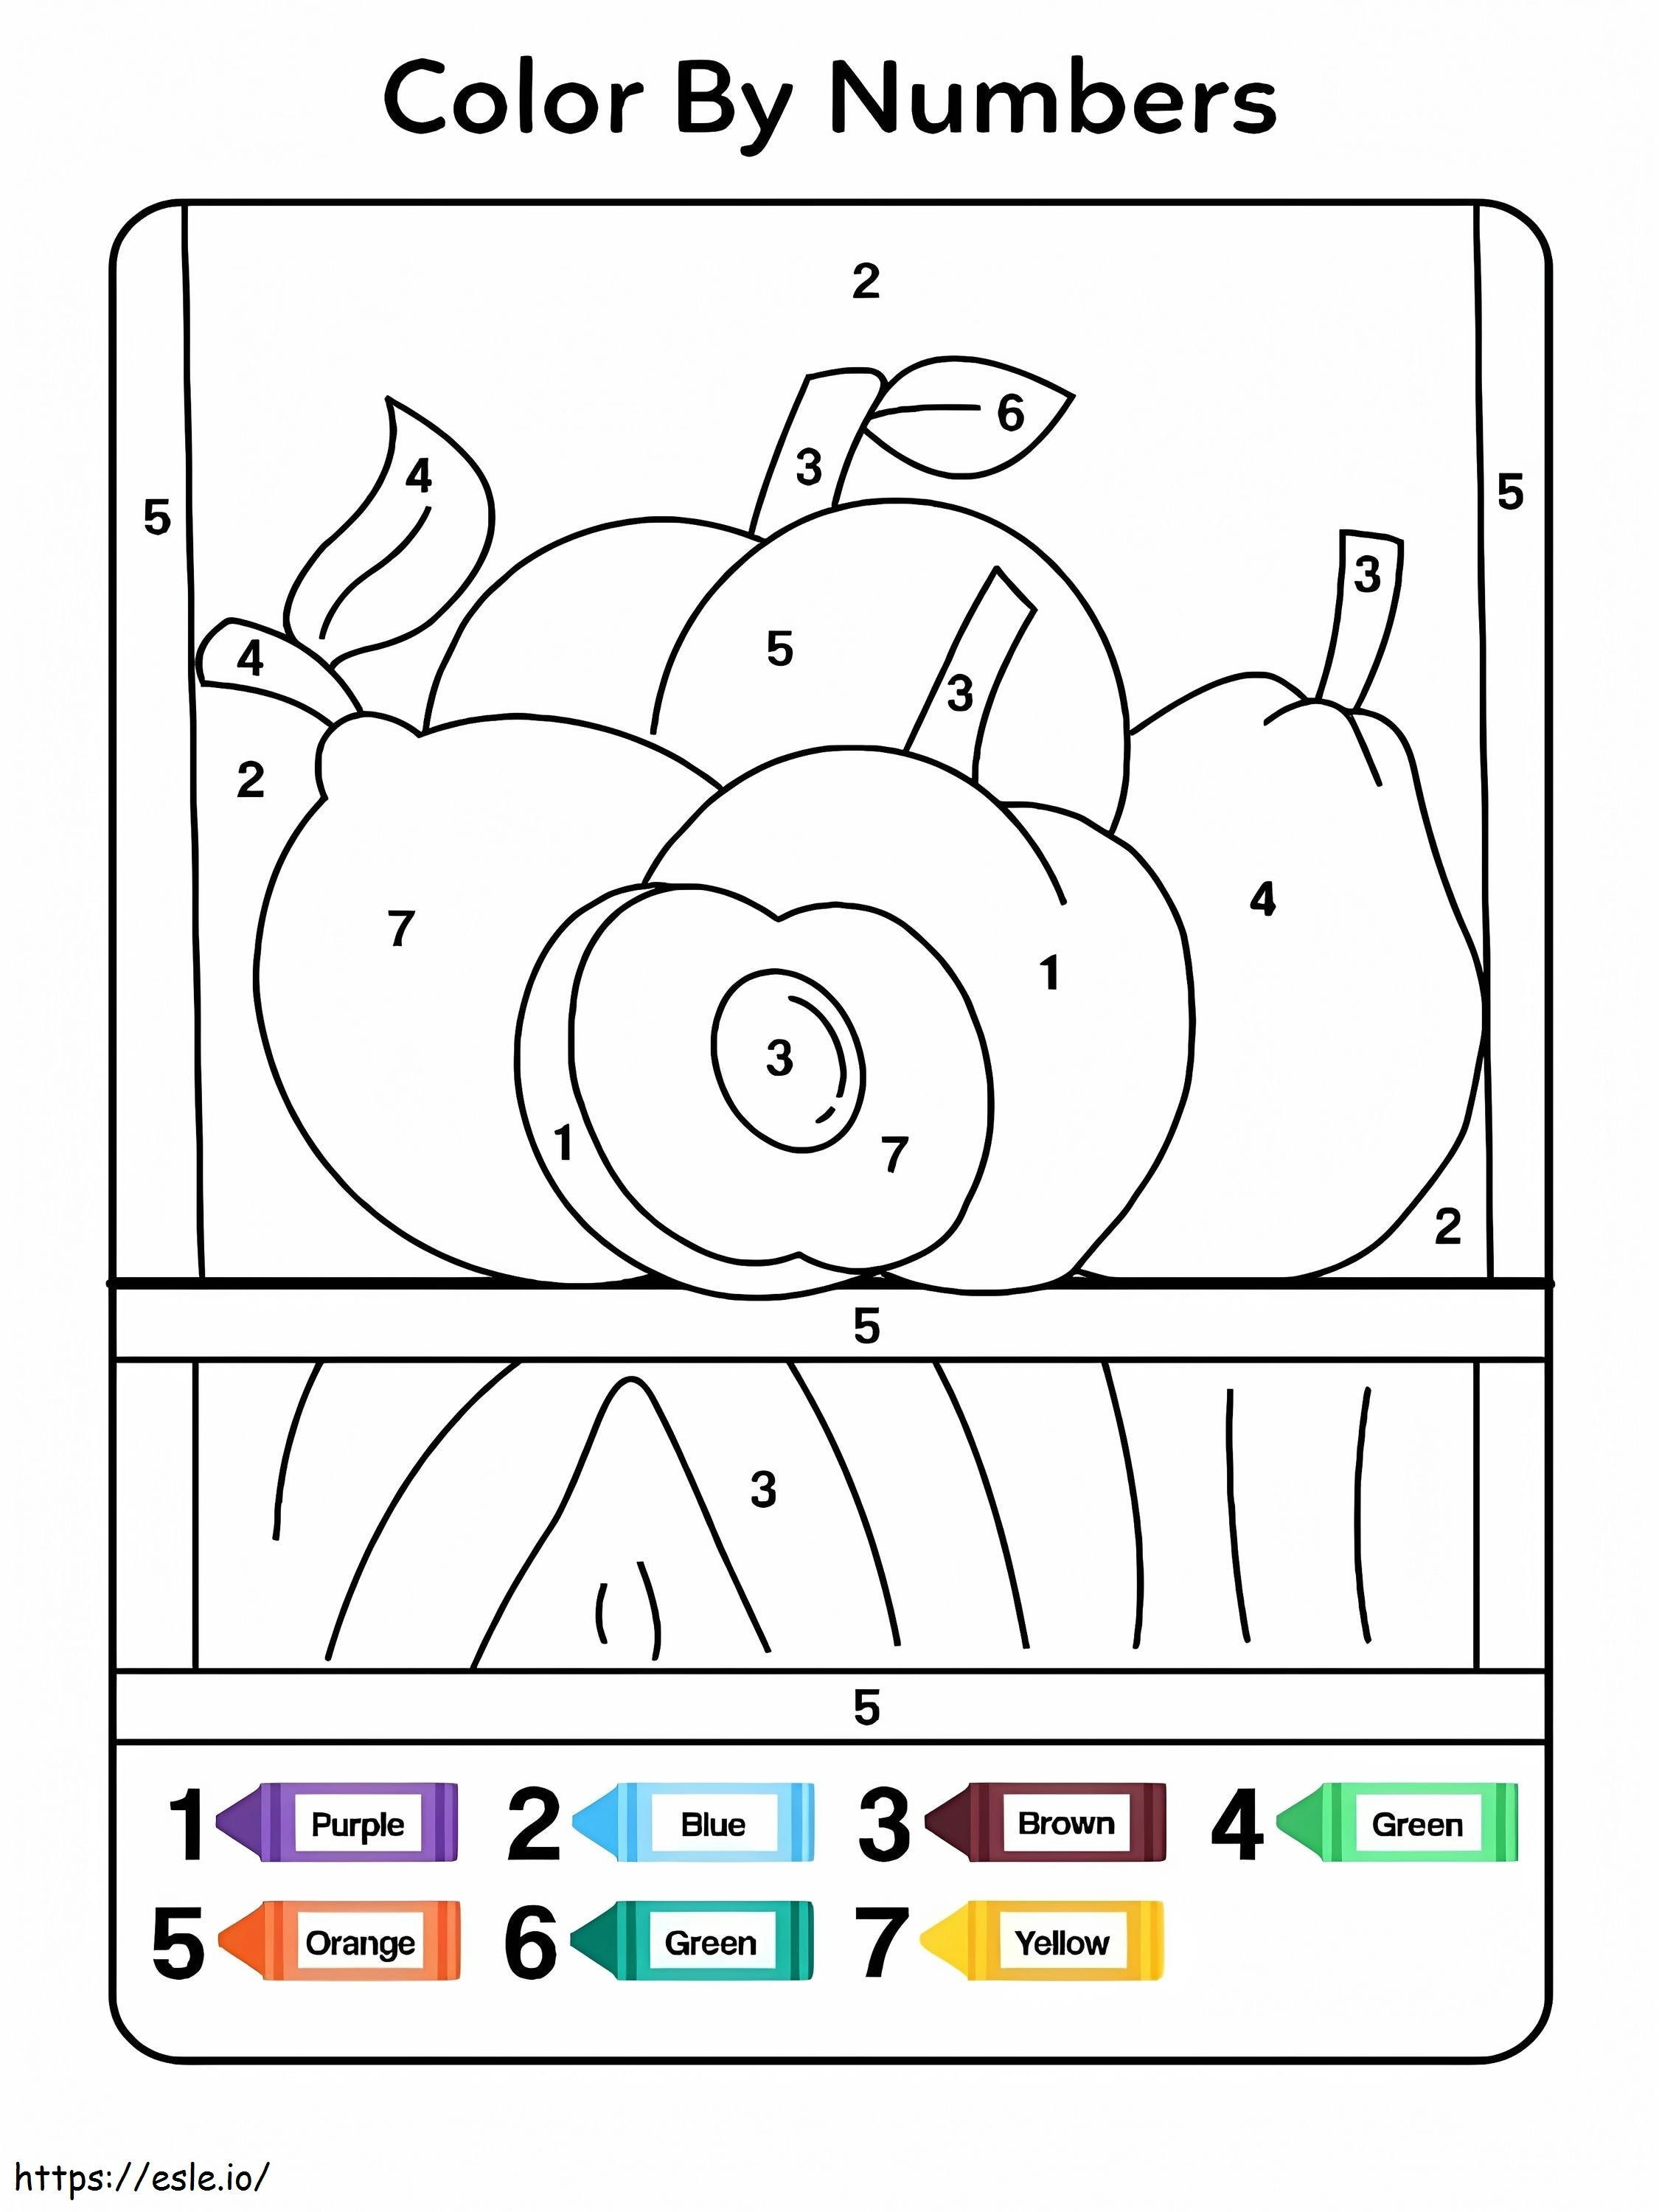 Free Fruits Color By Number coloring page